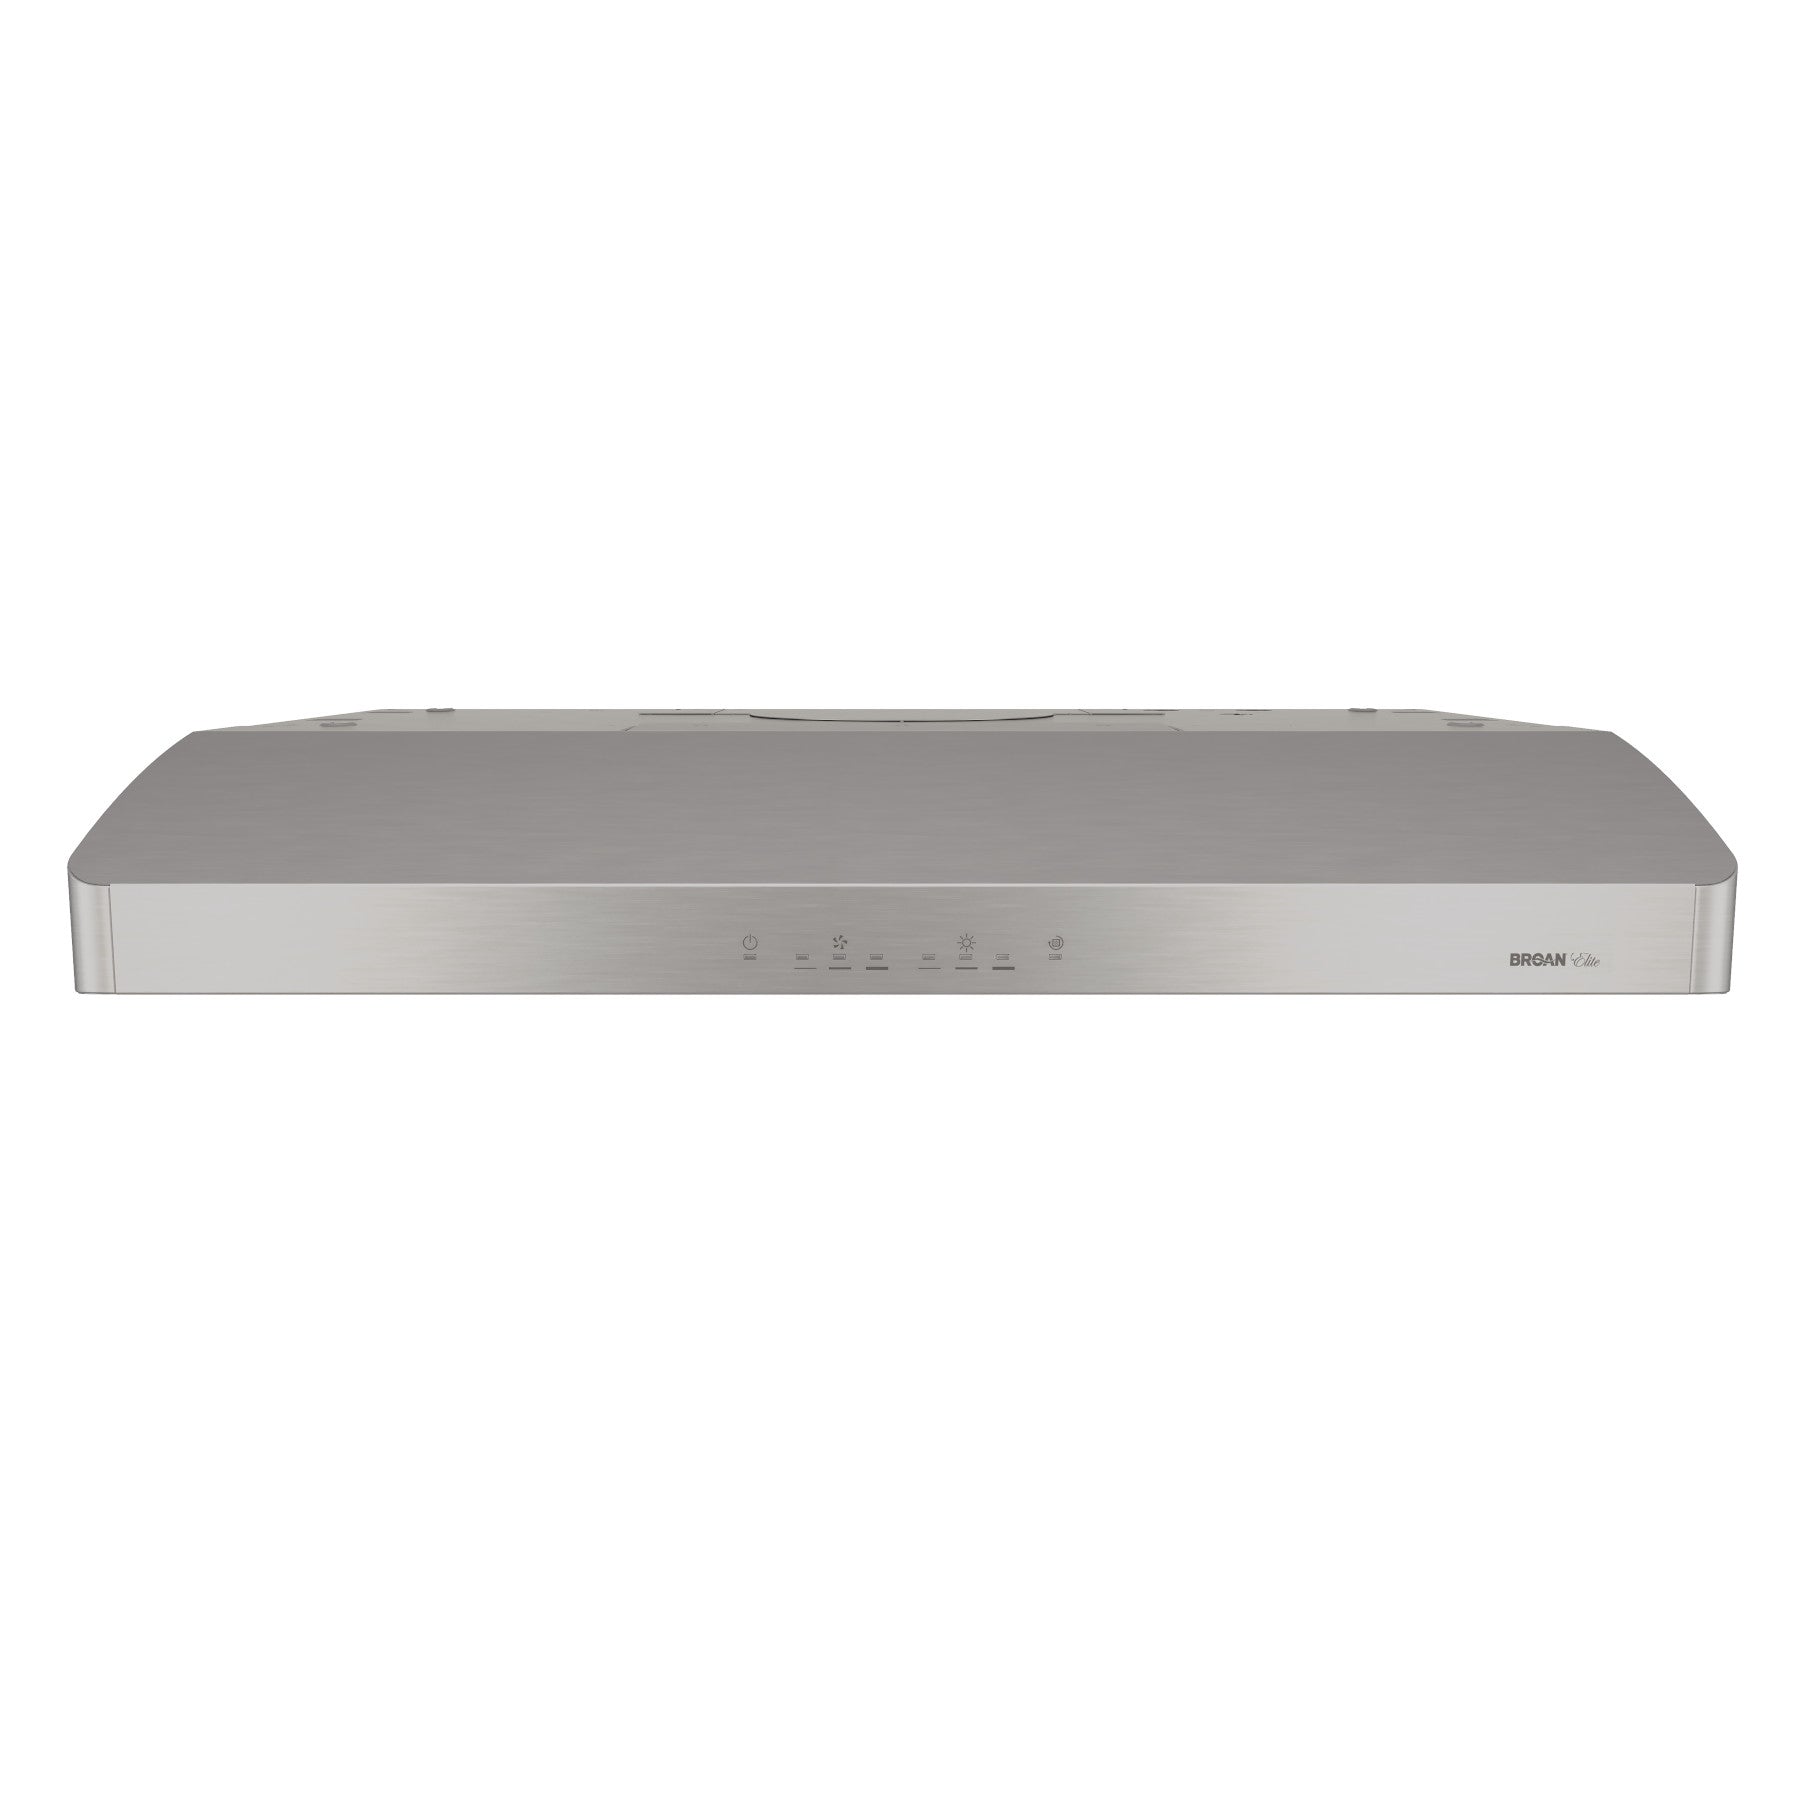 Broan - 36 Inch 650 CFM Under Cabinet Range Vent in Stainless - ERLE136SS